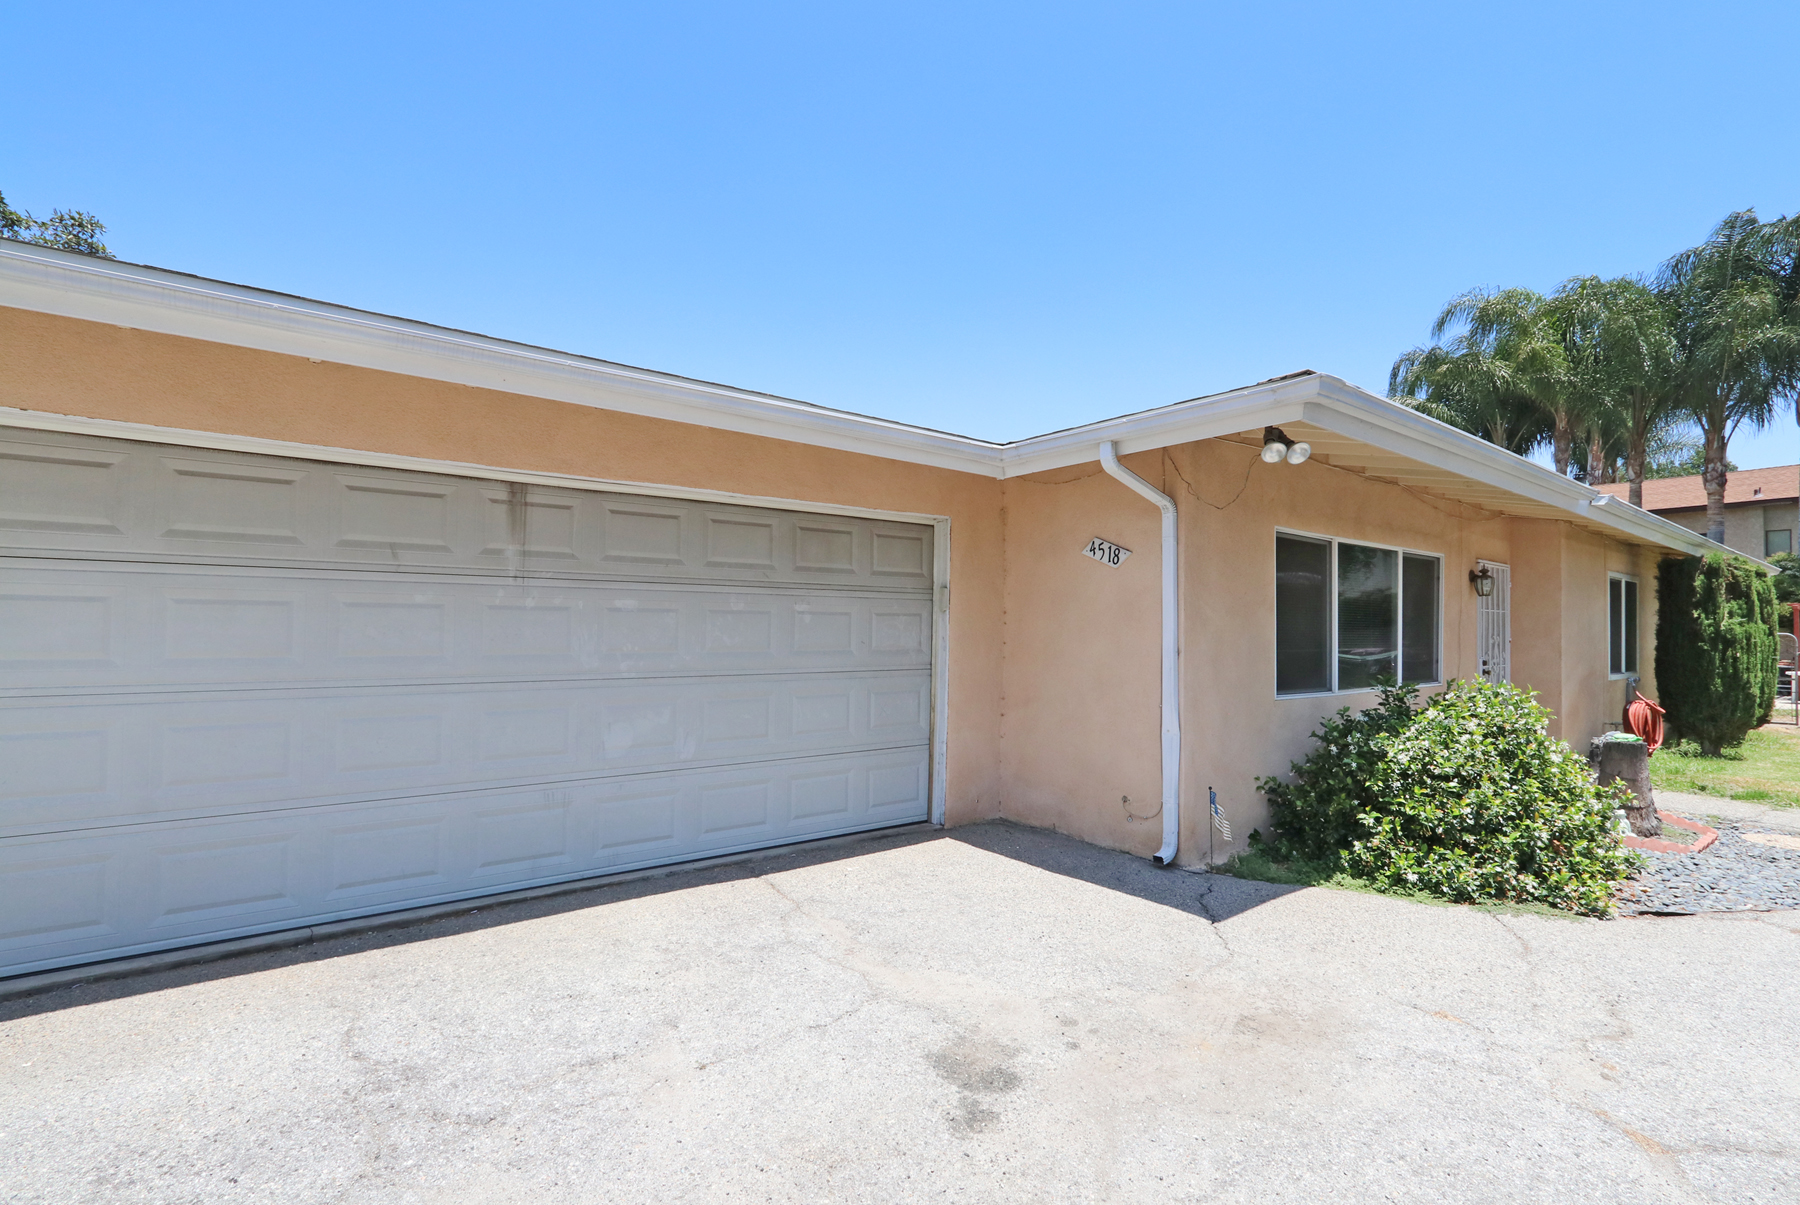 Affordable Move-In Ready Home in North El Monte